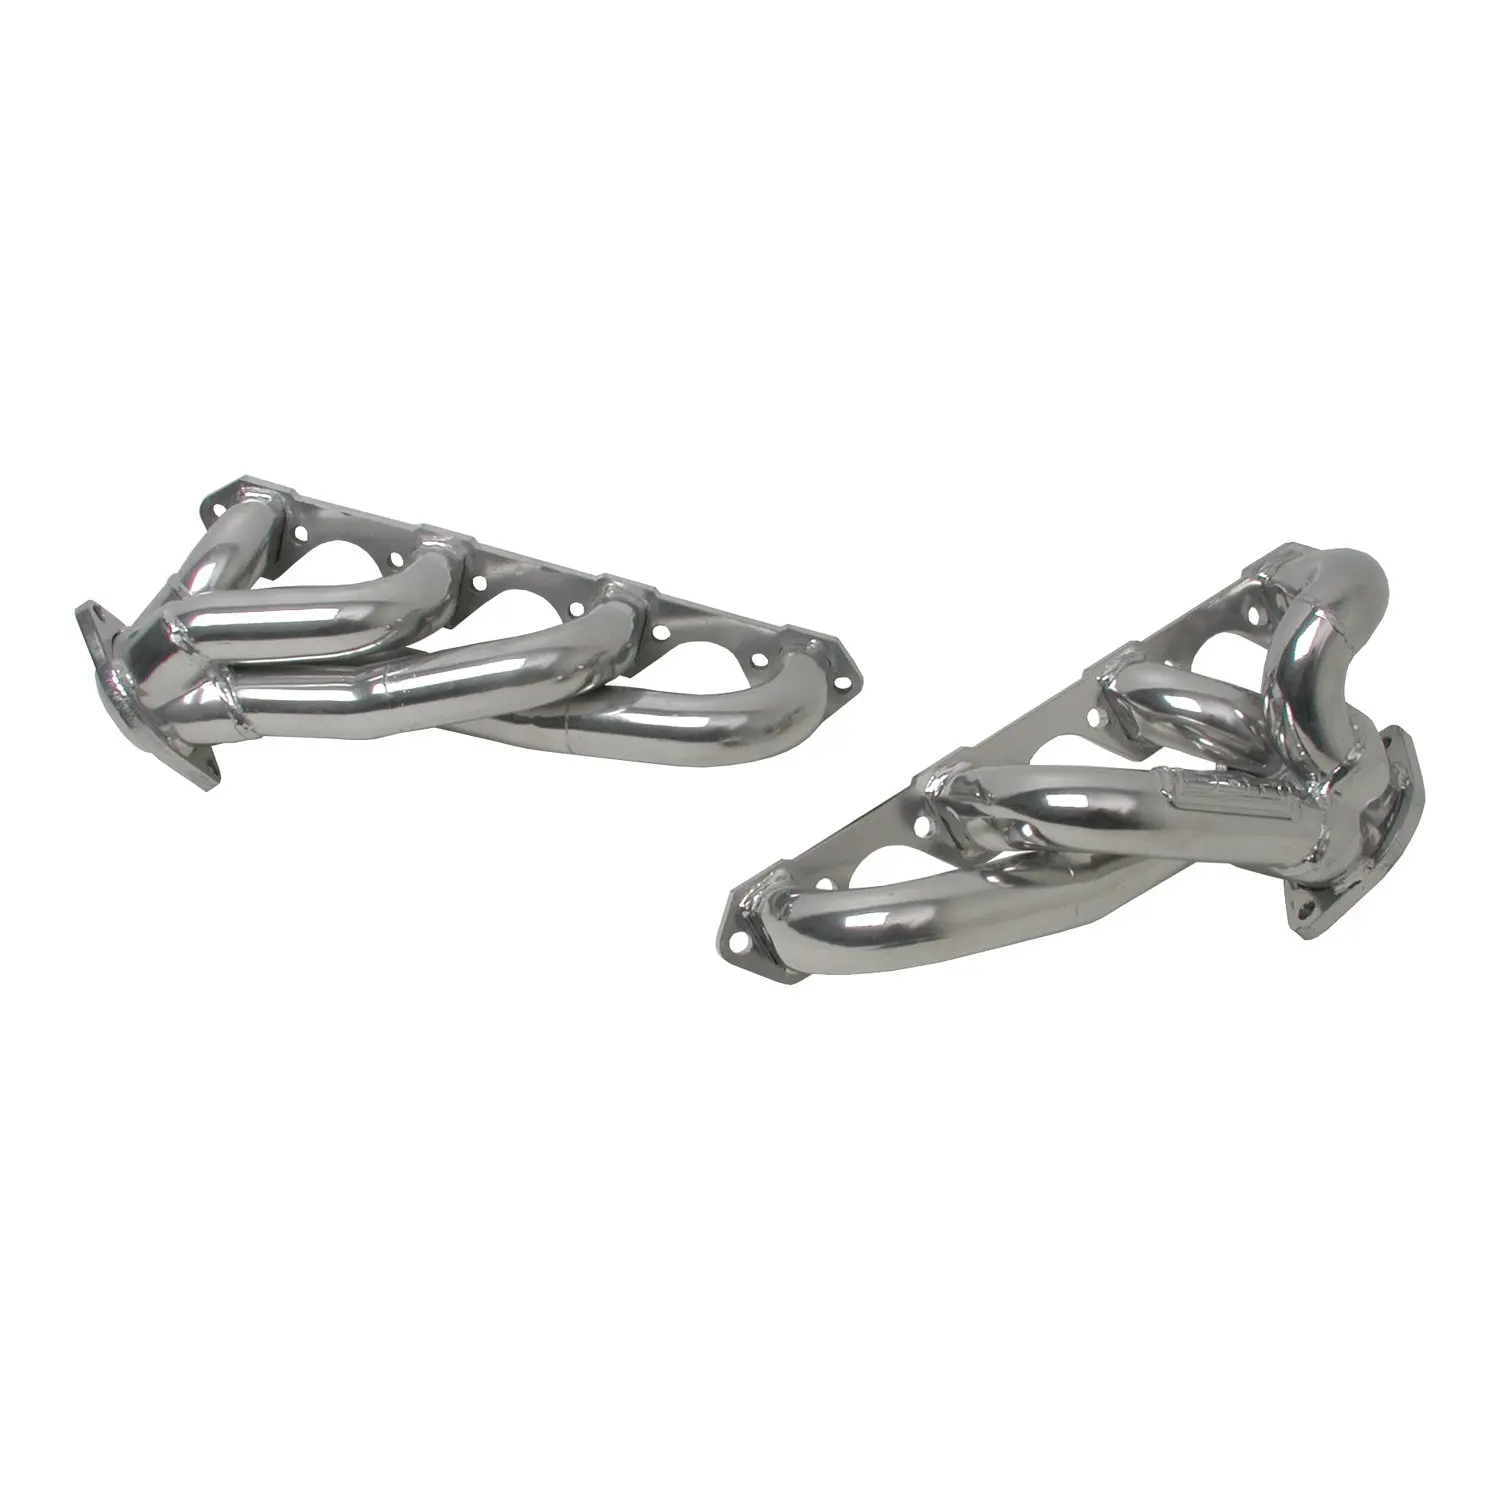 BBK 3515 Chrome 1-5/8 Shorty Tuned Length Exhaust Header for Ford F-150/Expedition 4.6L